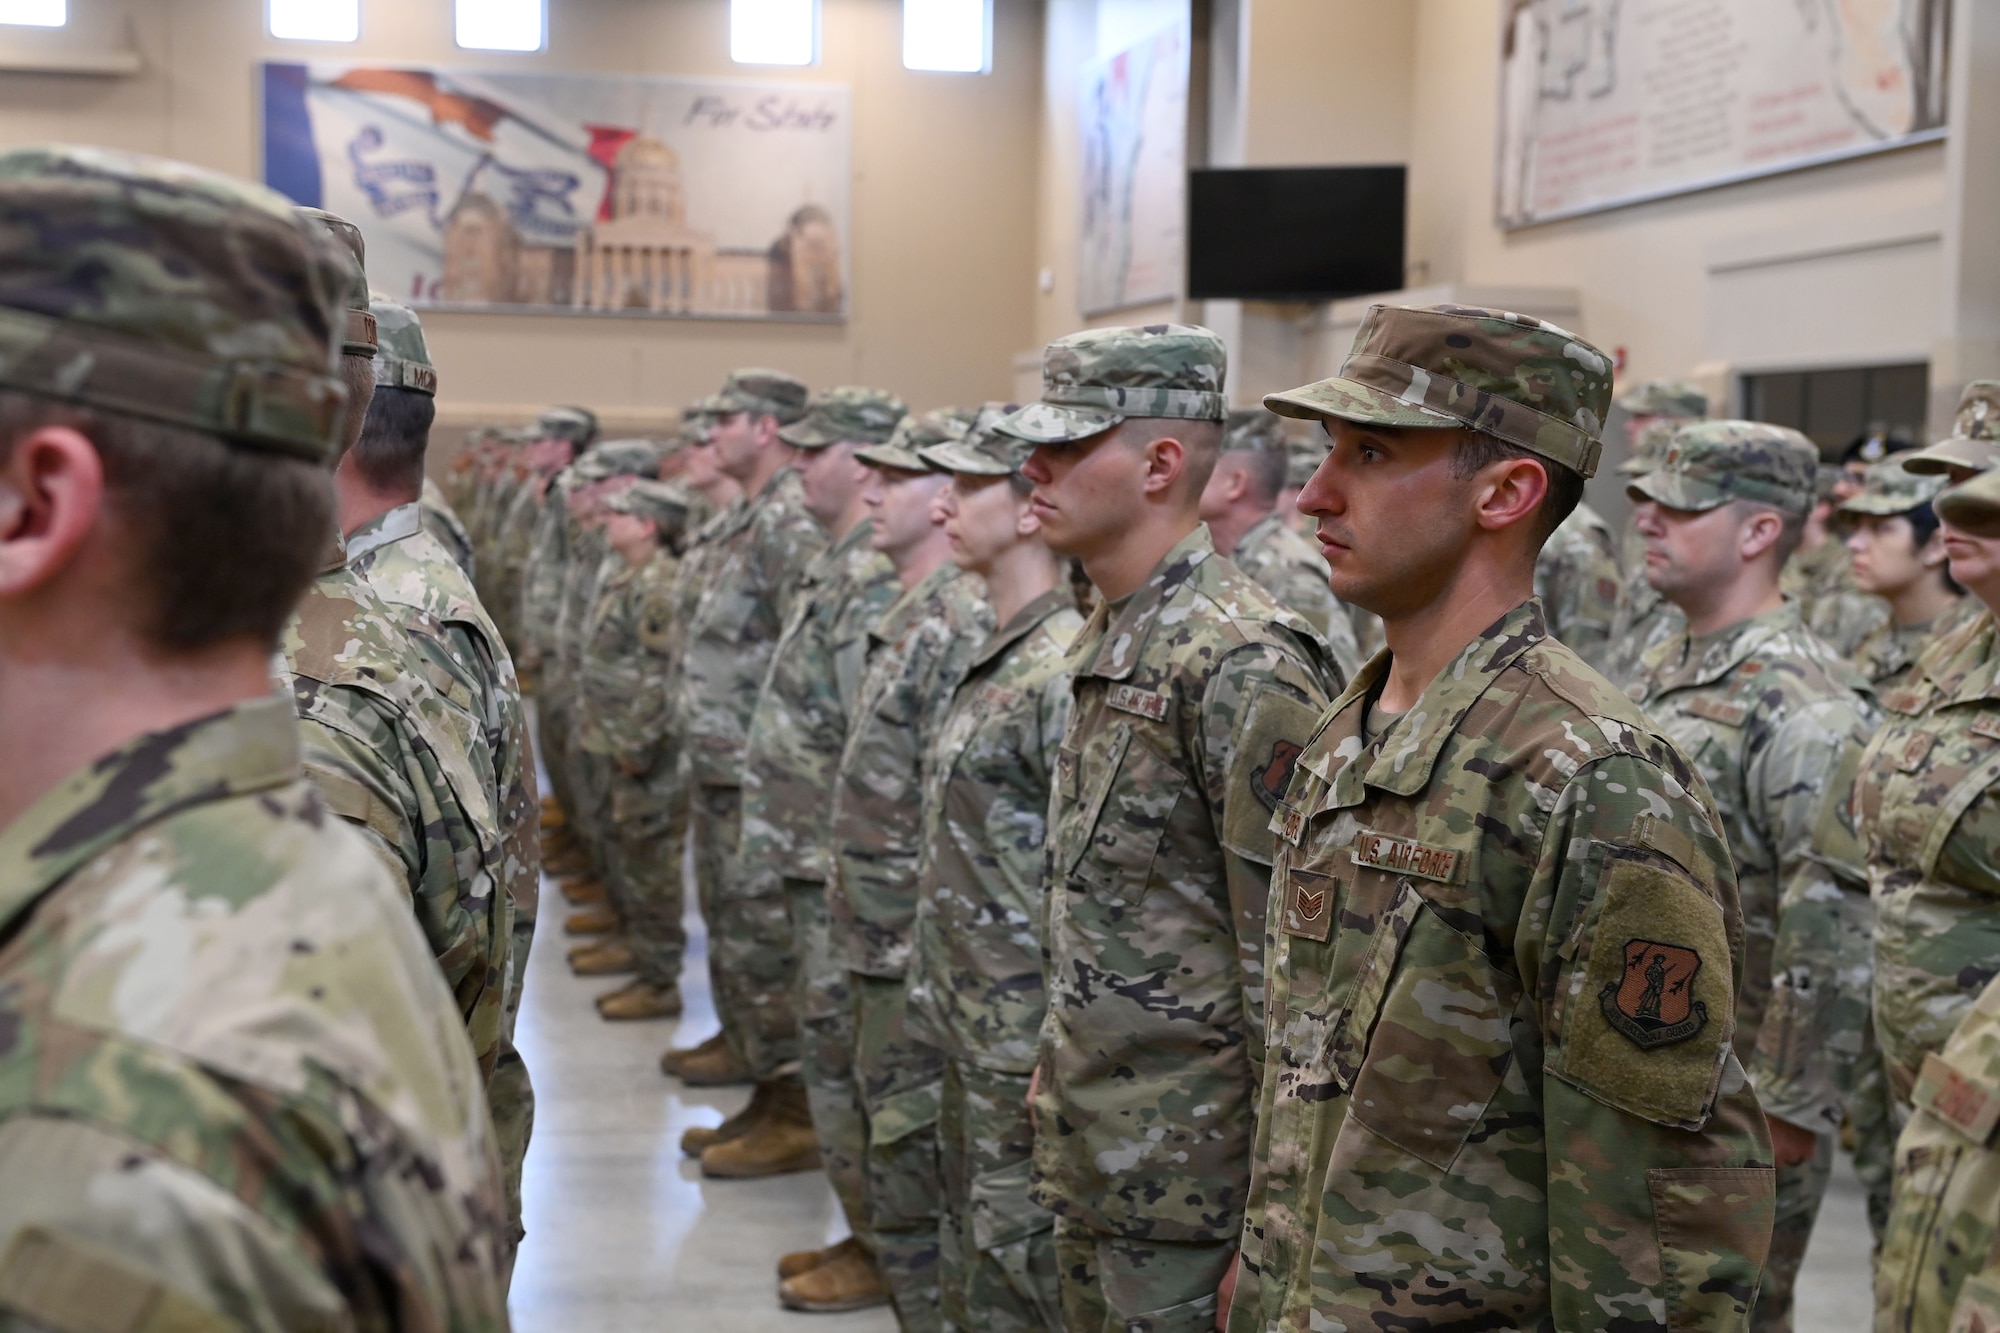 132d Wing Airmen stand in formation during the TAG's Annual Retreat Ceremony, May 28, 2021 at Camp Dodge in Johnston, Iowa. Air and Army National Guard units from around the state of Iowa were present. (U.S. Air National Guard photo by Tech. Sgt. Michael J. Kelly)